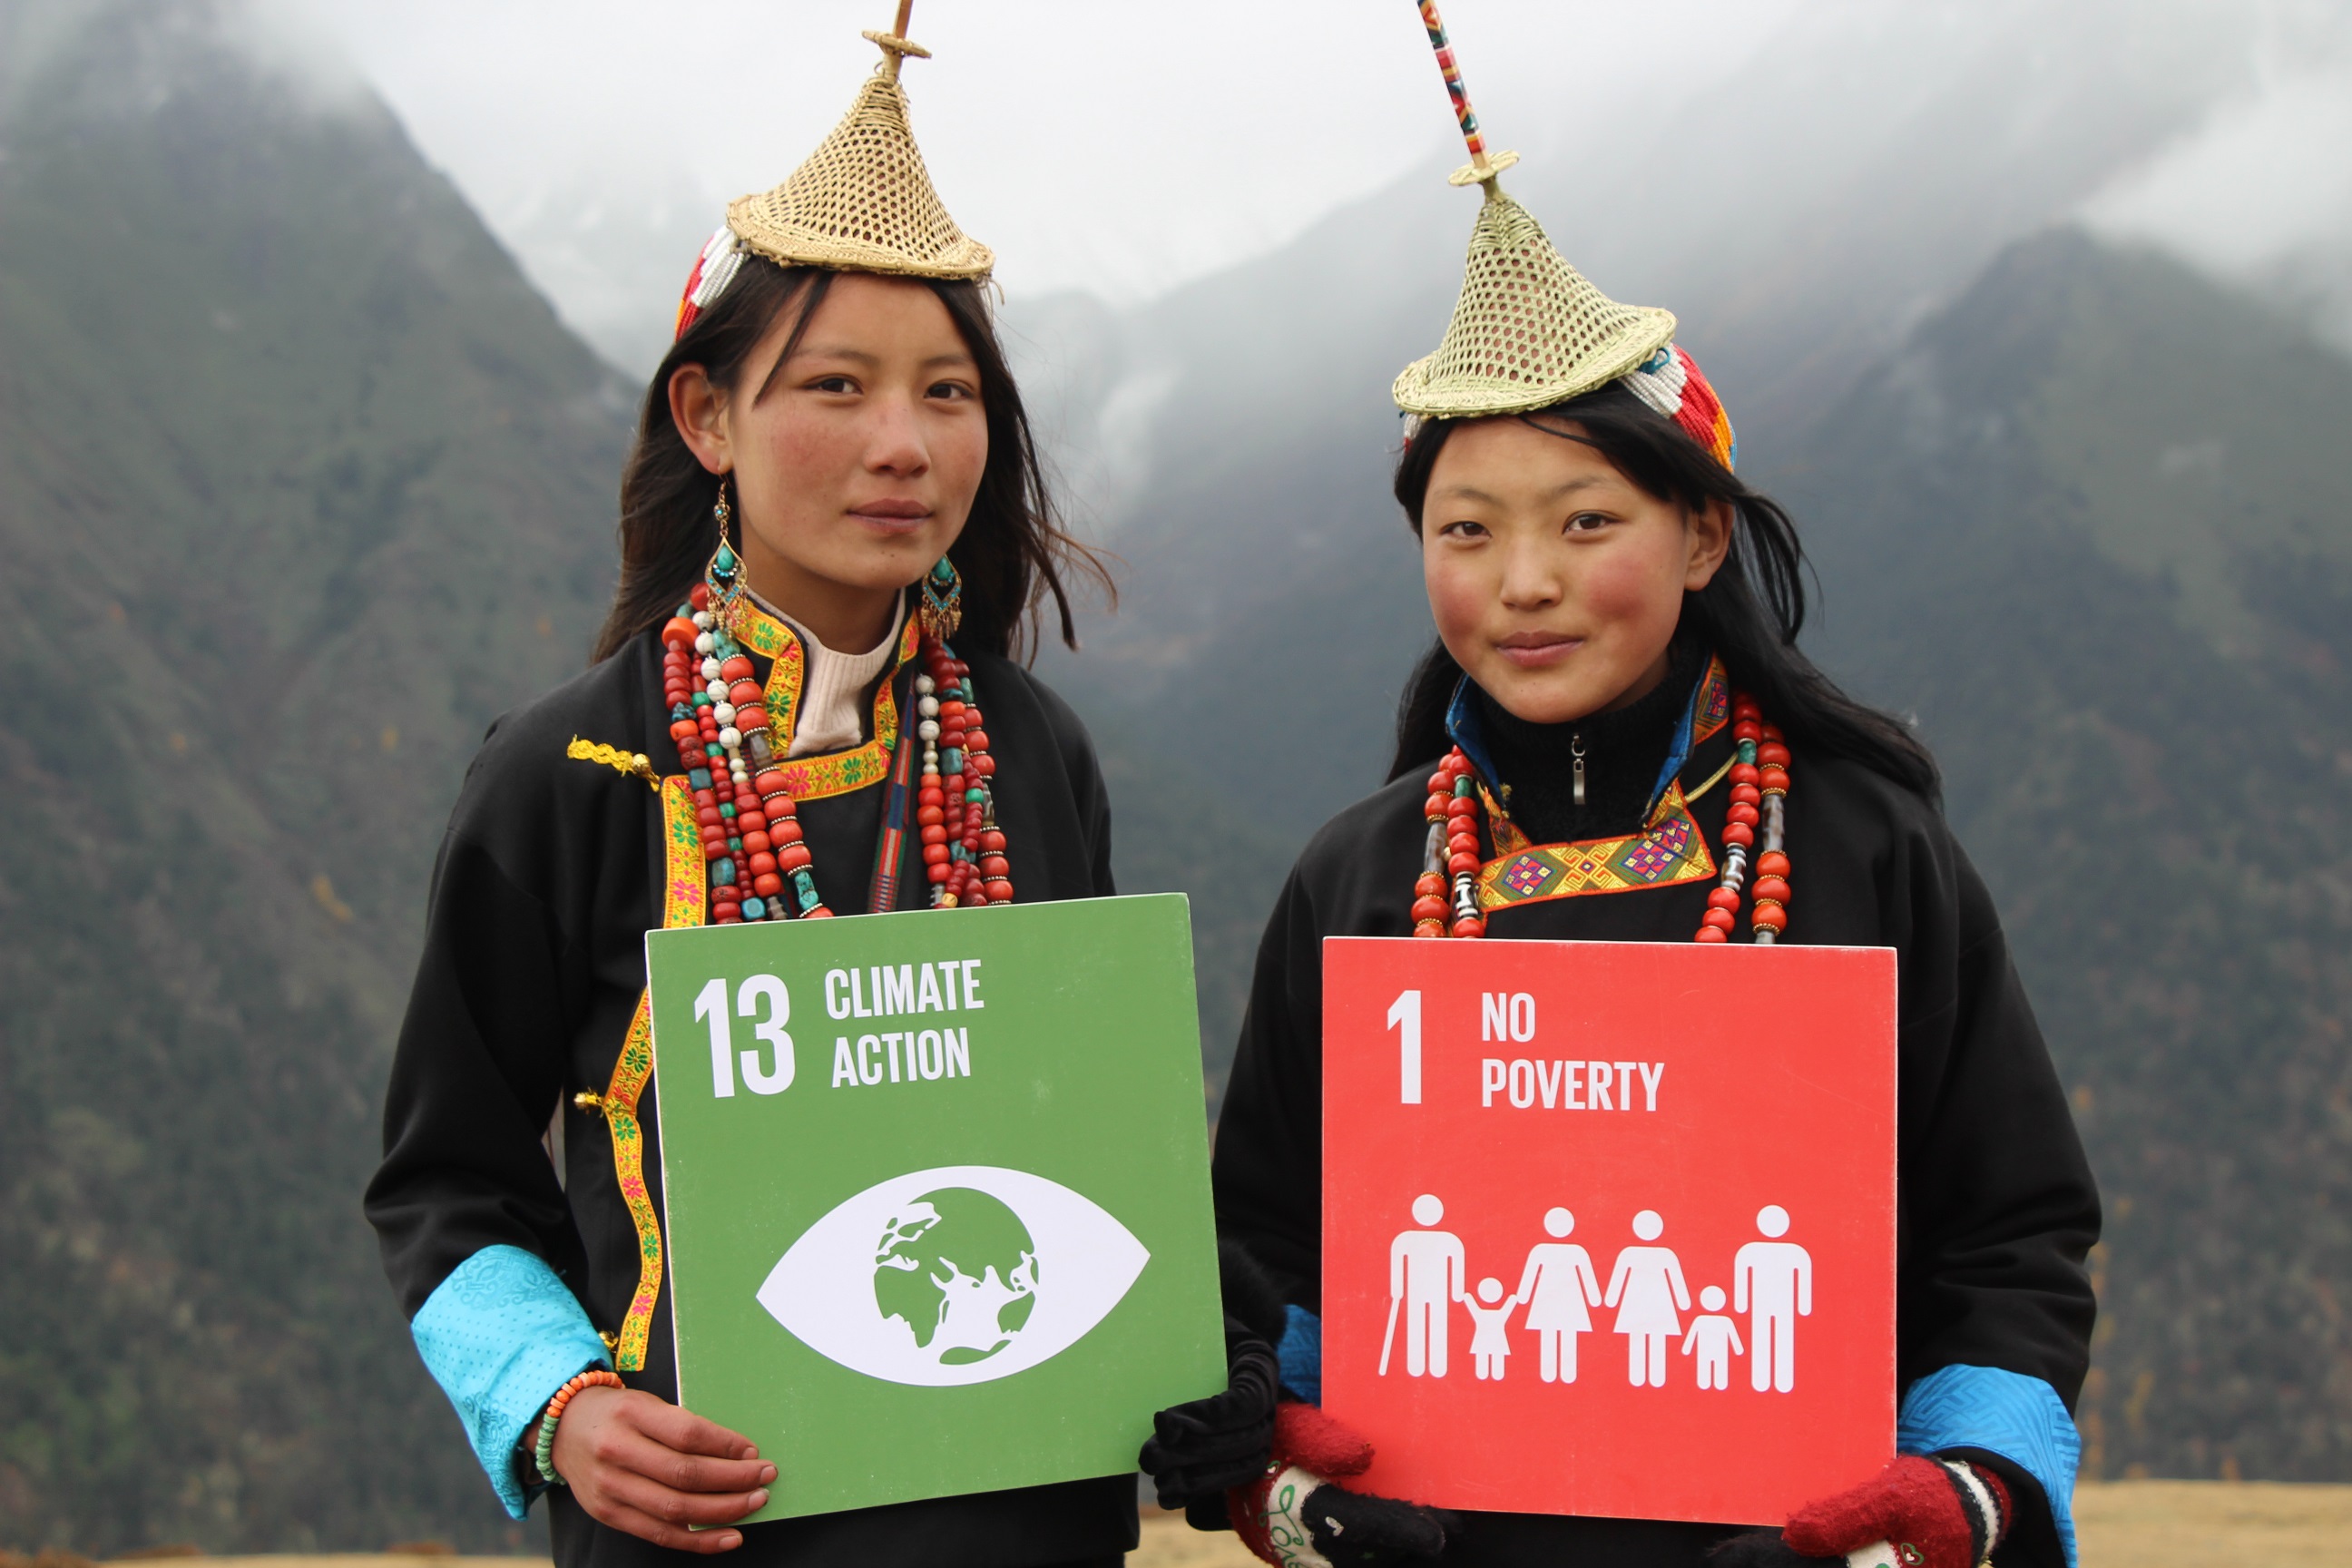 Women in Nepal holding 'climate action' and 'no poverty' signs.